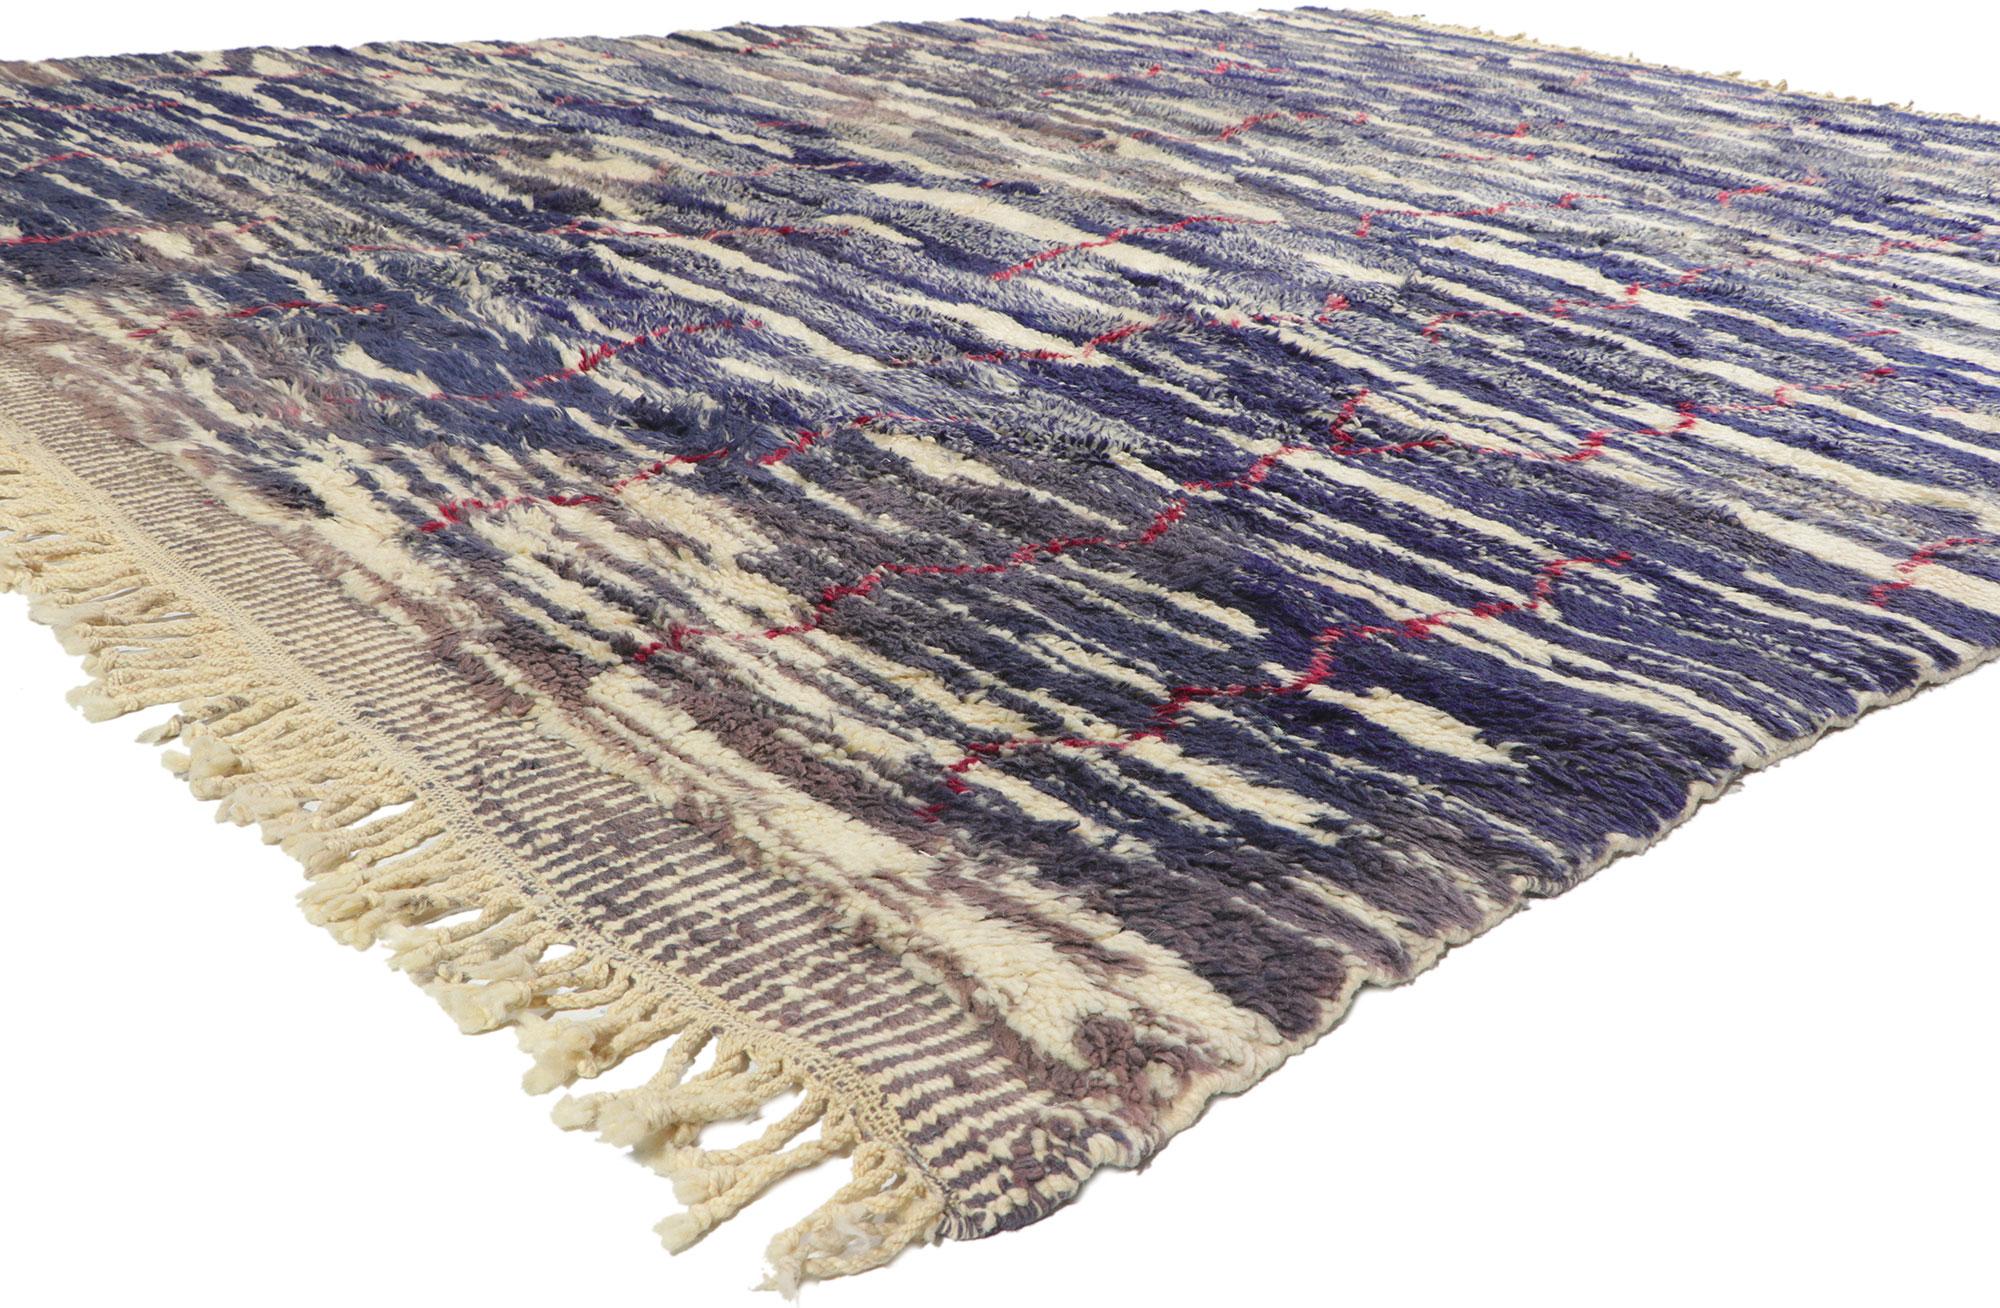 21675 New Authentic Moroccan Rug, 10'00 x 12'00.
Nomadic charm collides with modern style in this large Berber Moroccan rug. The abstract design and lively colors woven into this piece work together creating a relaxed yet comfortable appeal. The